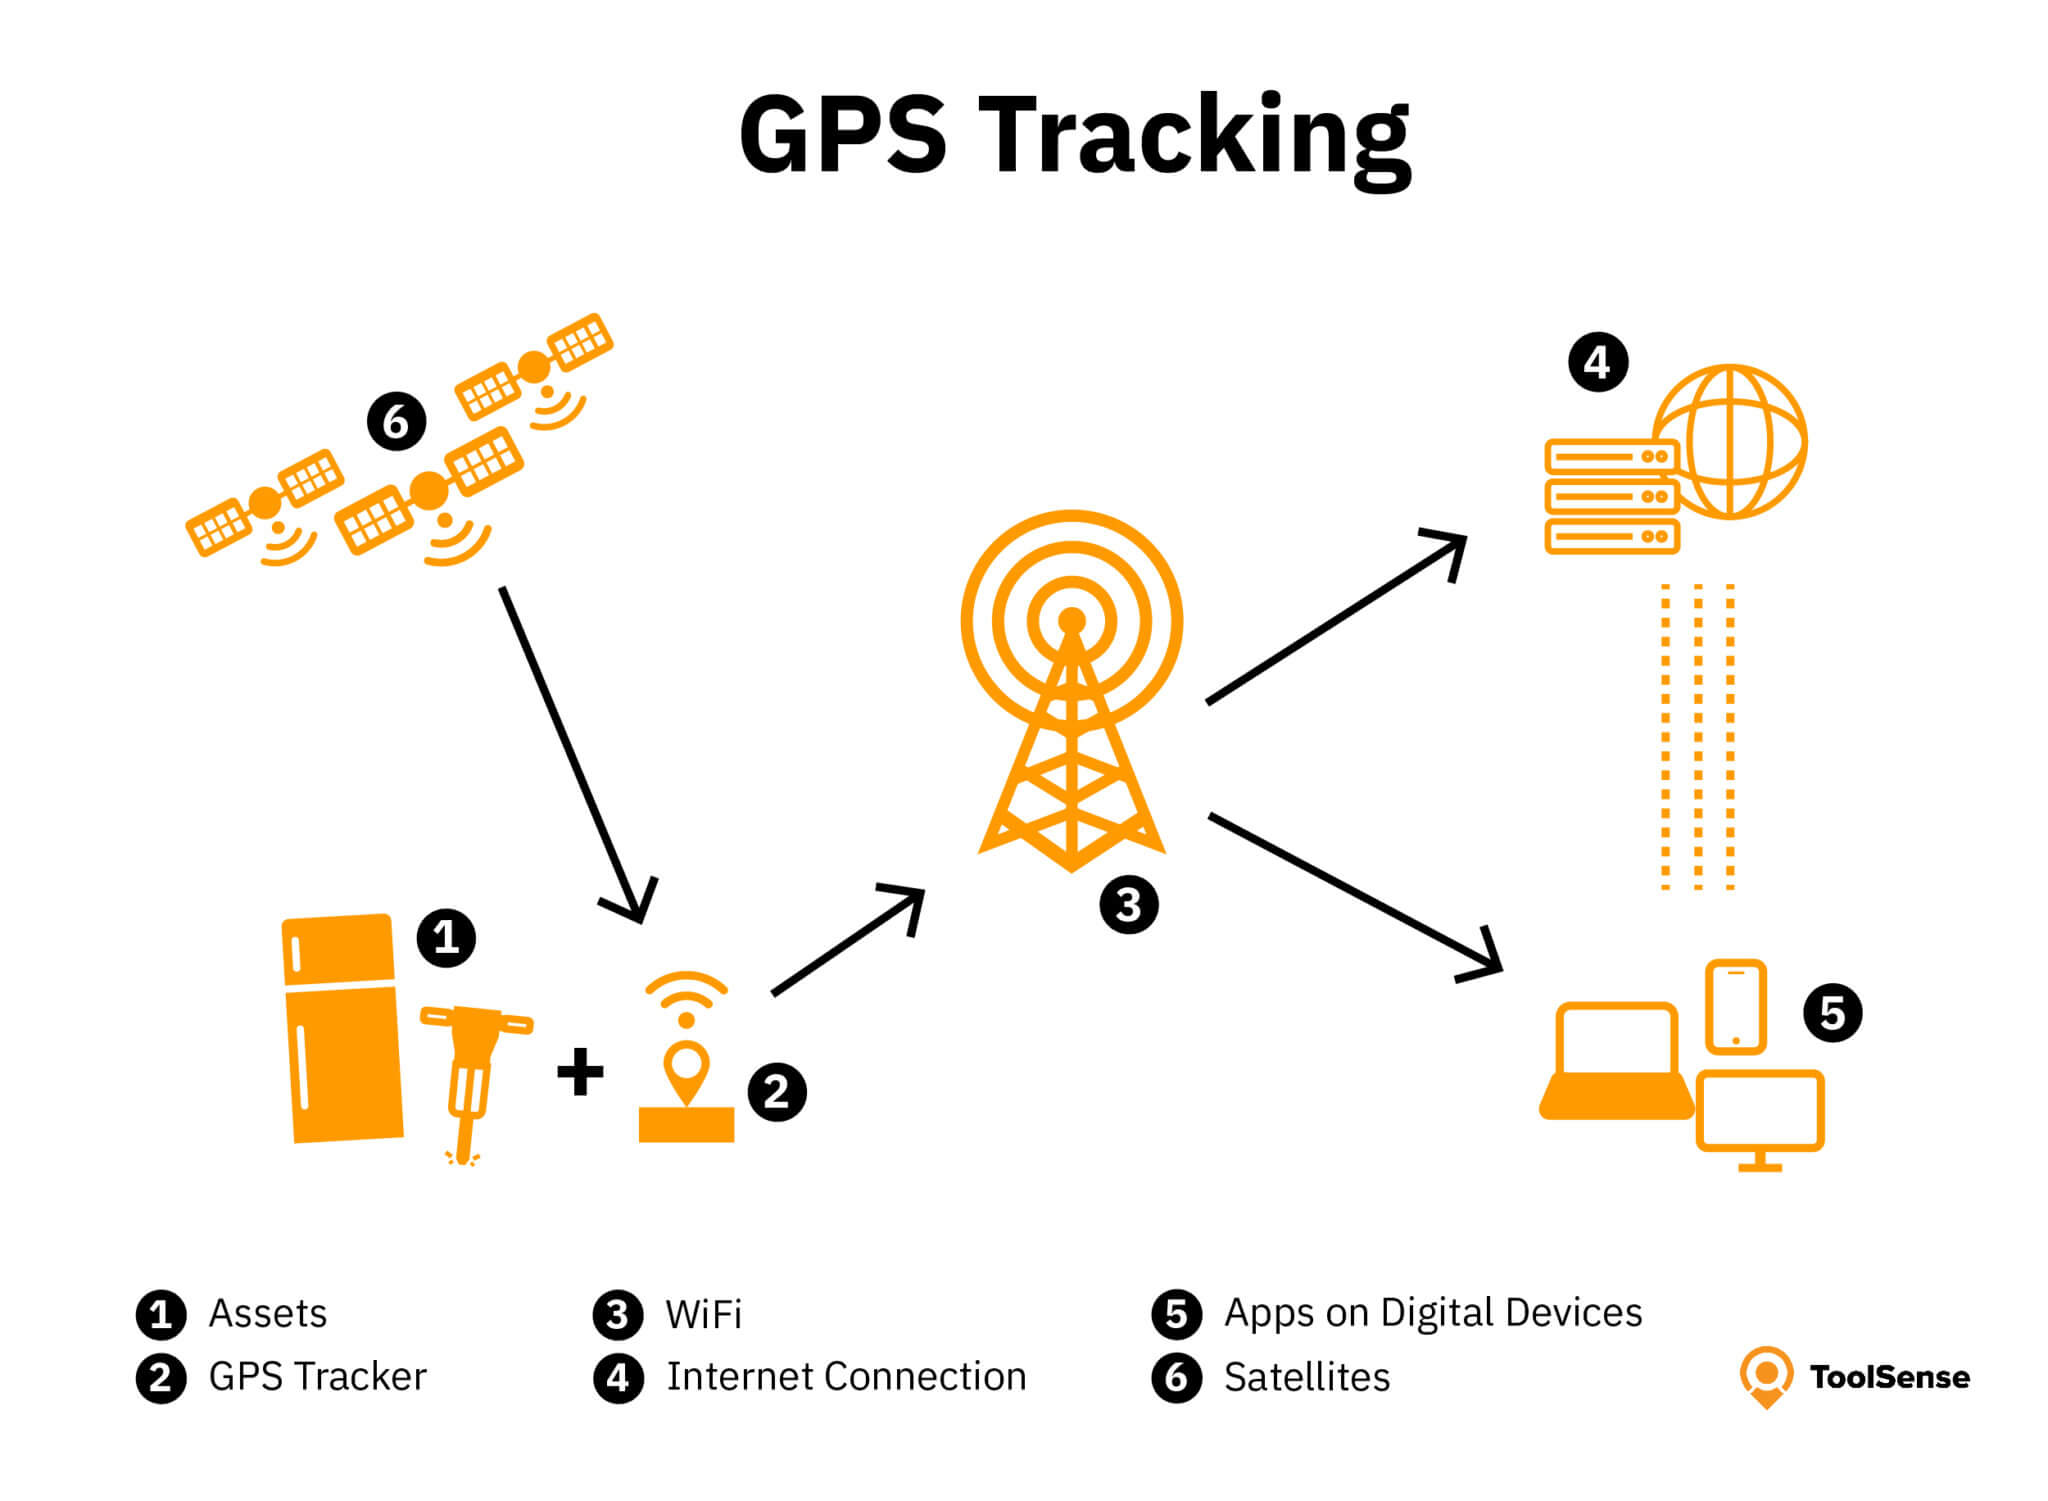 GPS Tracking for Equipment explained